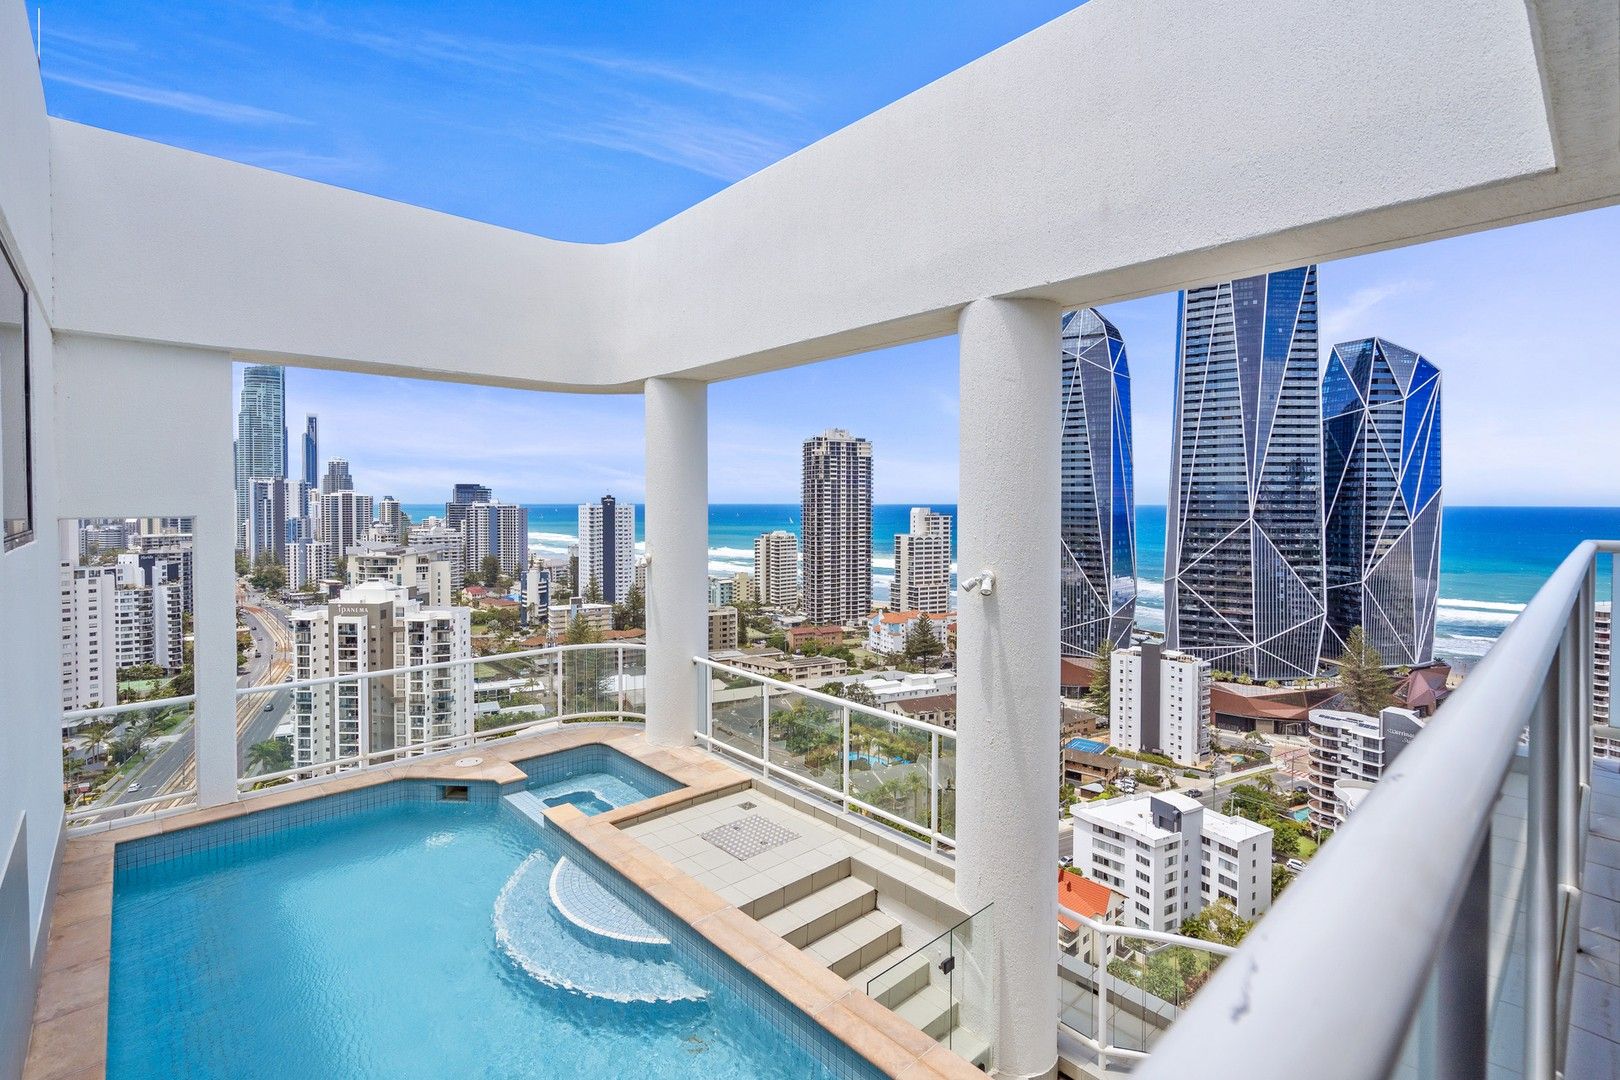 Tradition svovl vin 2101/2801-2833 Gold Coast Highway, Surfers Paradise QLD 4217 | Domain